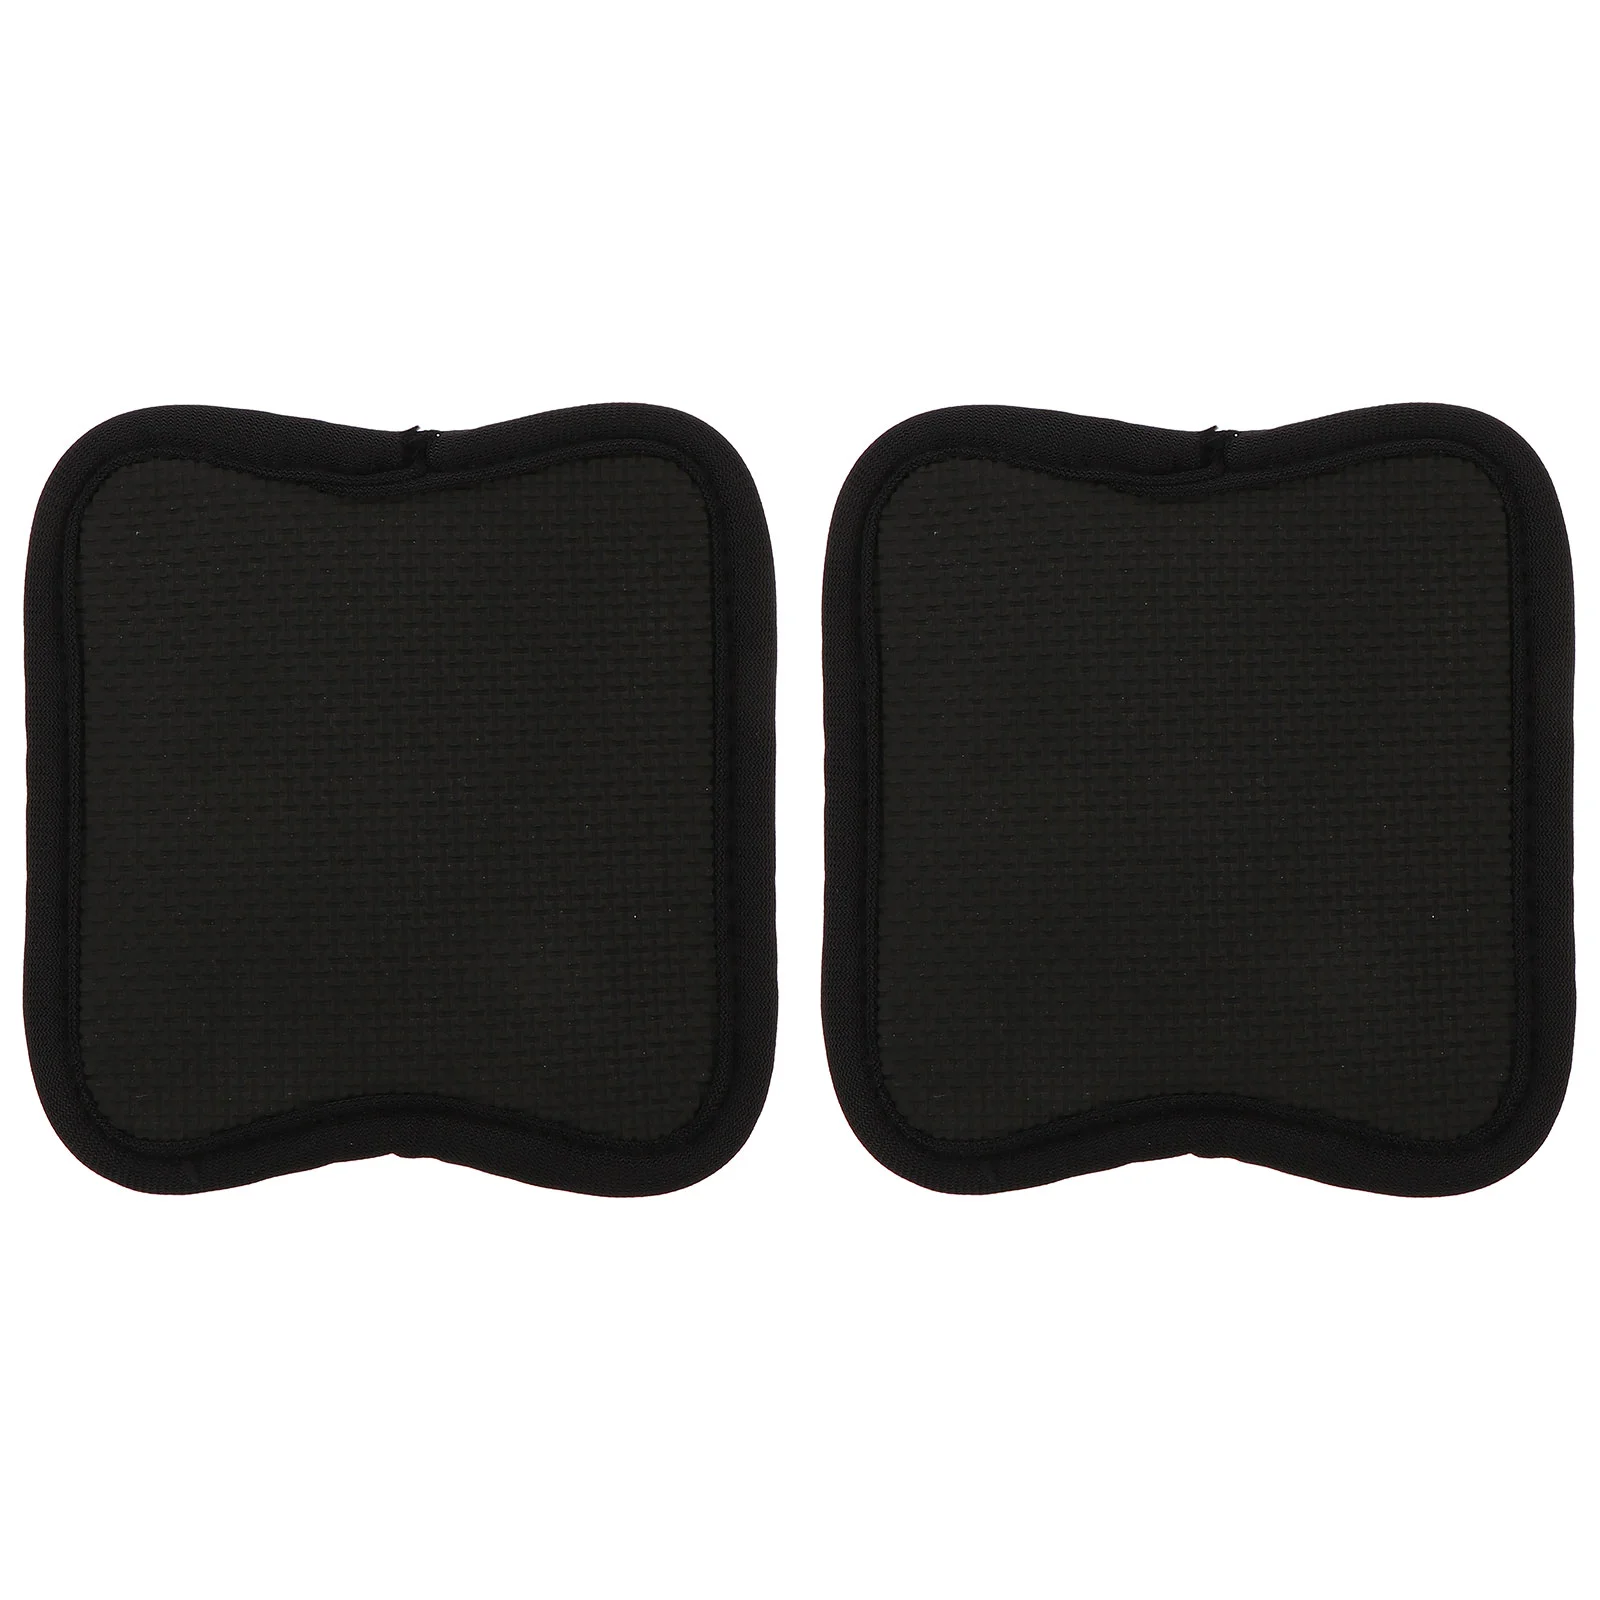 

1 Pair Gym Accessories For Men Grips Hand Pad Weight-Lifting Gym Training Anti-Slips Bare Hand Grip Pad